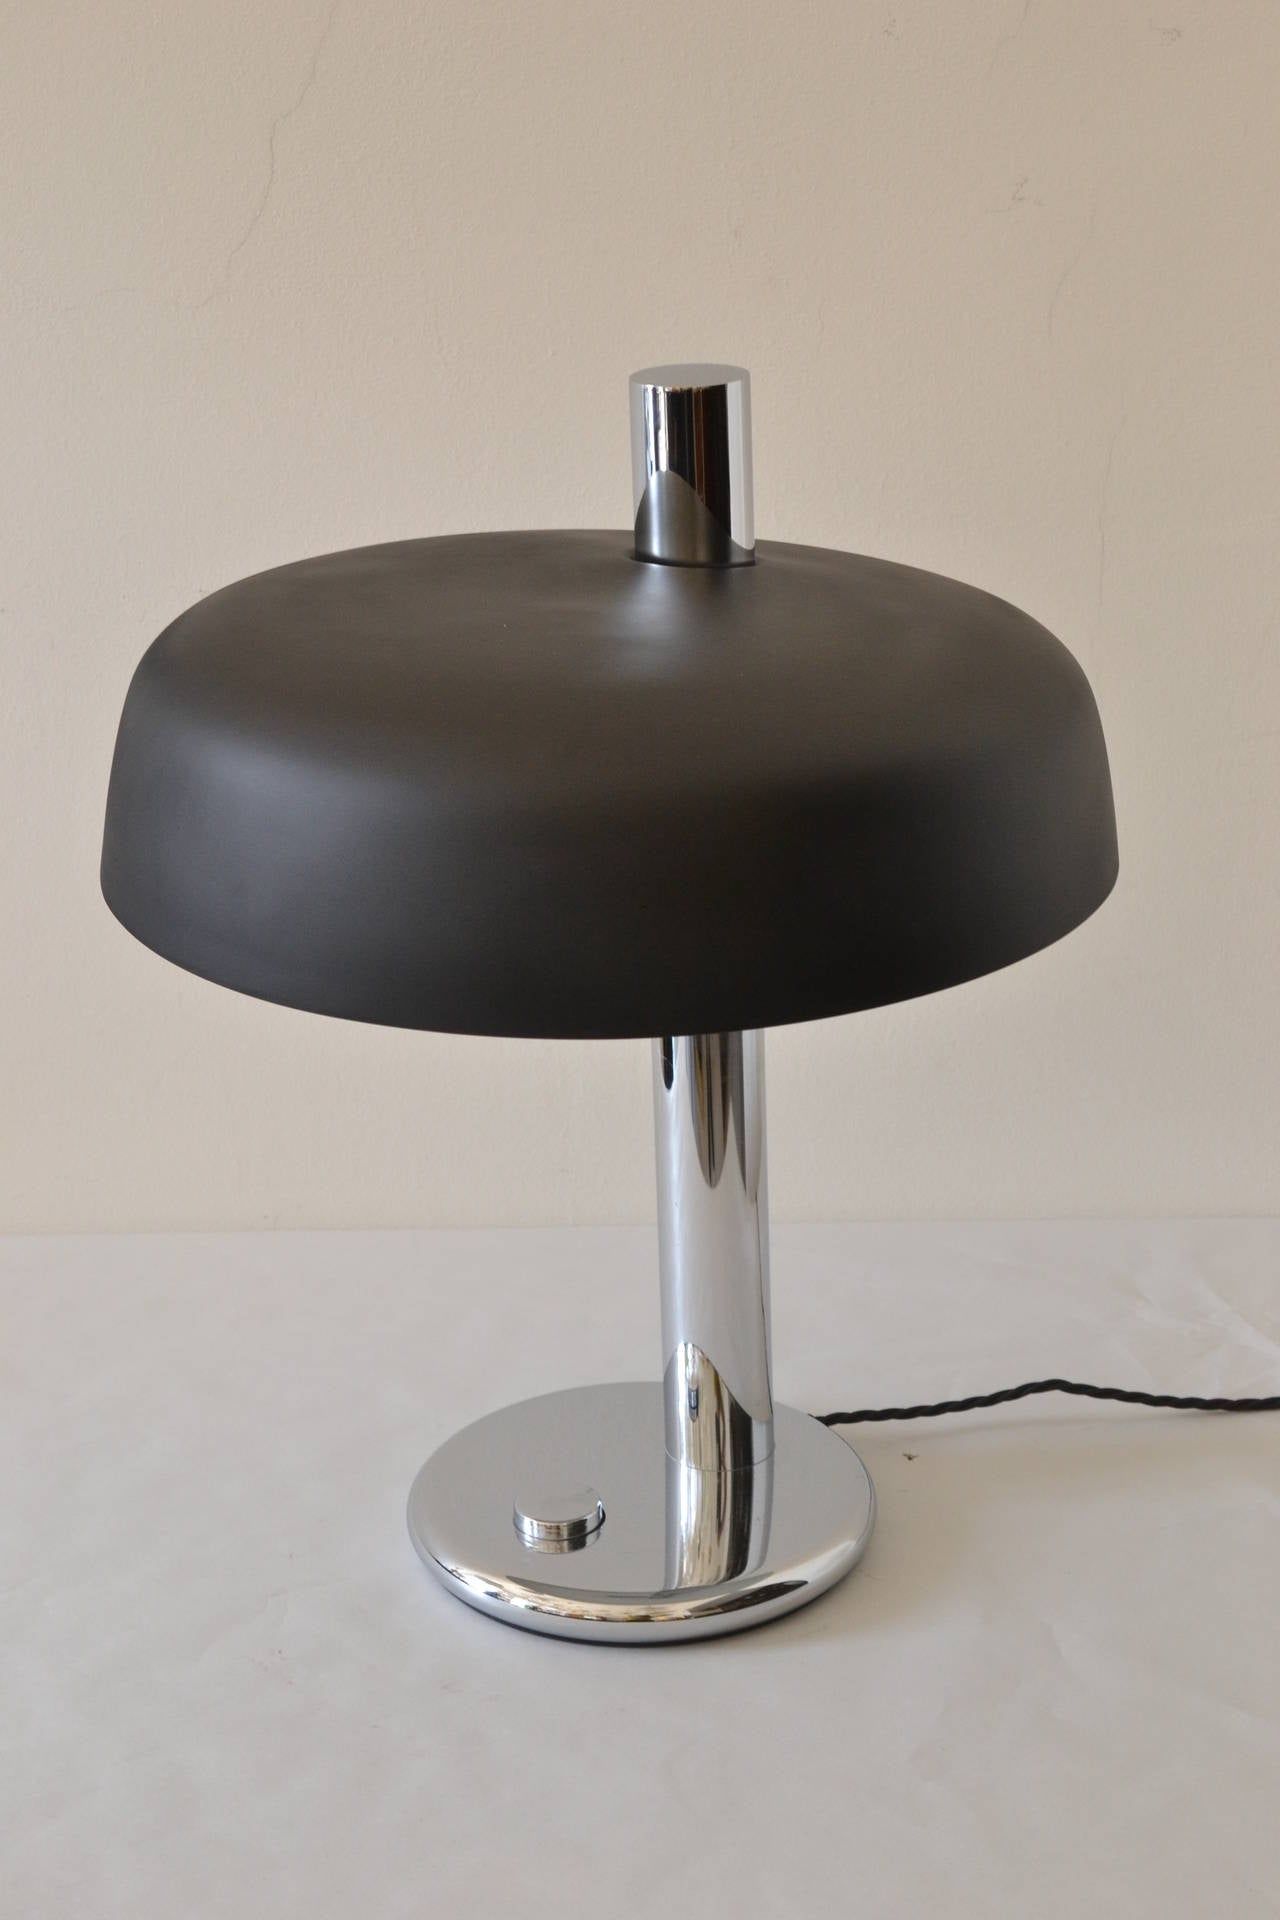 1930's American Modernist nickel plated Table Lamp